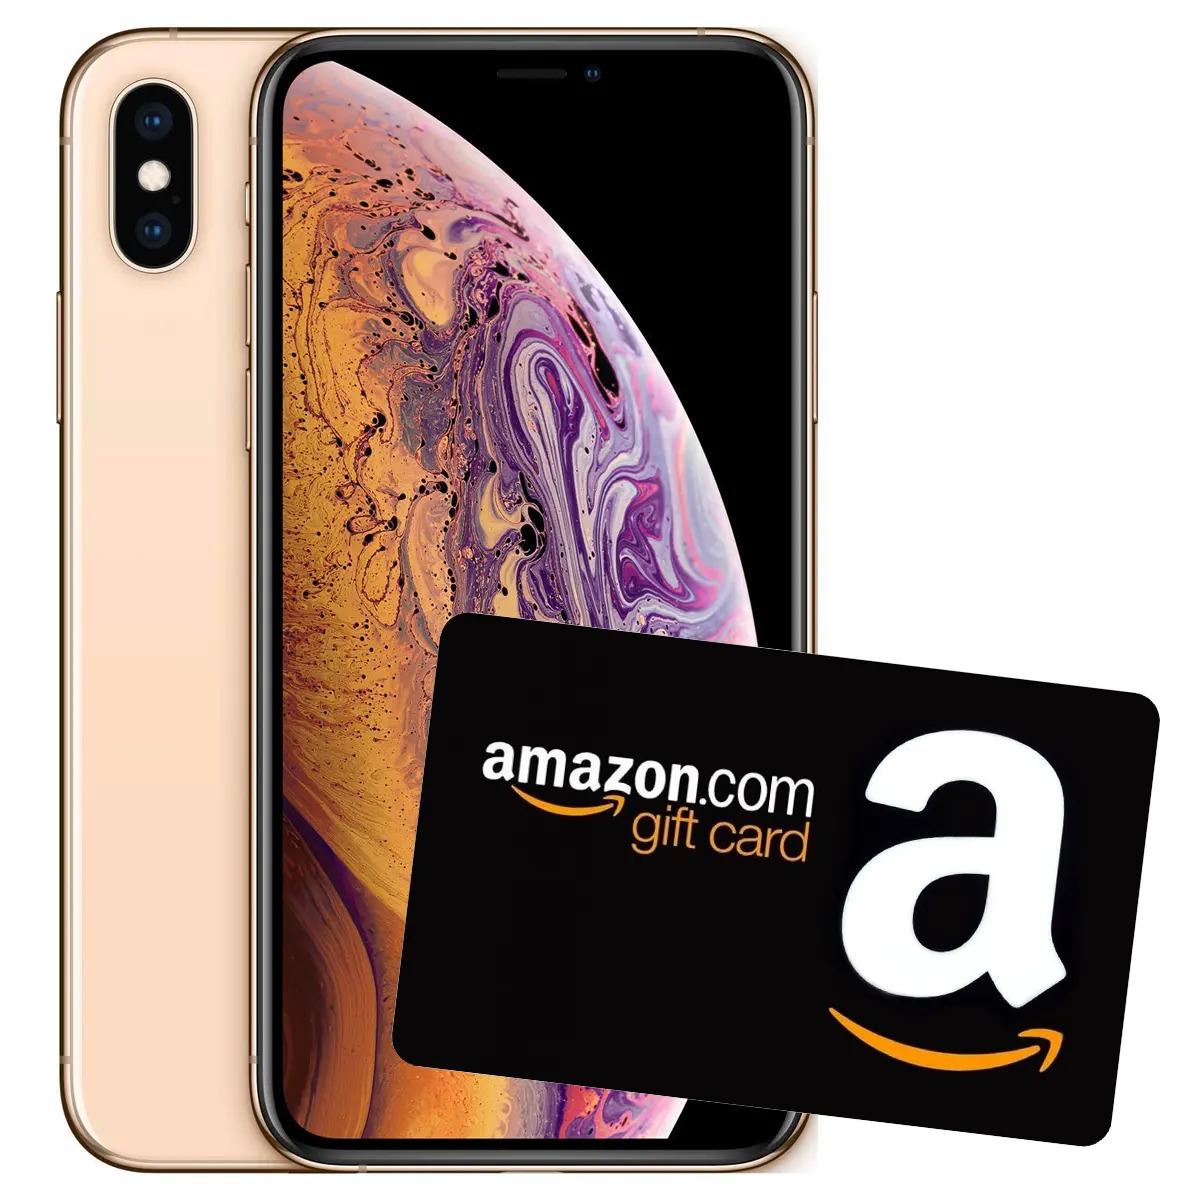 Apple iPhone XS 64GB Gold + 3 Months Service + $150 Amazon Gift Card for $354 Shipped